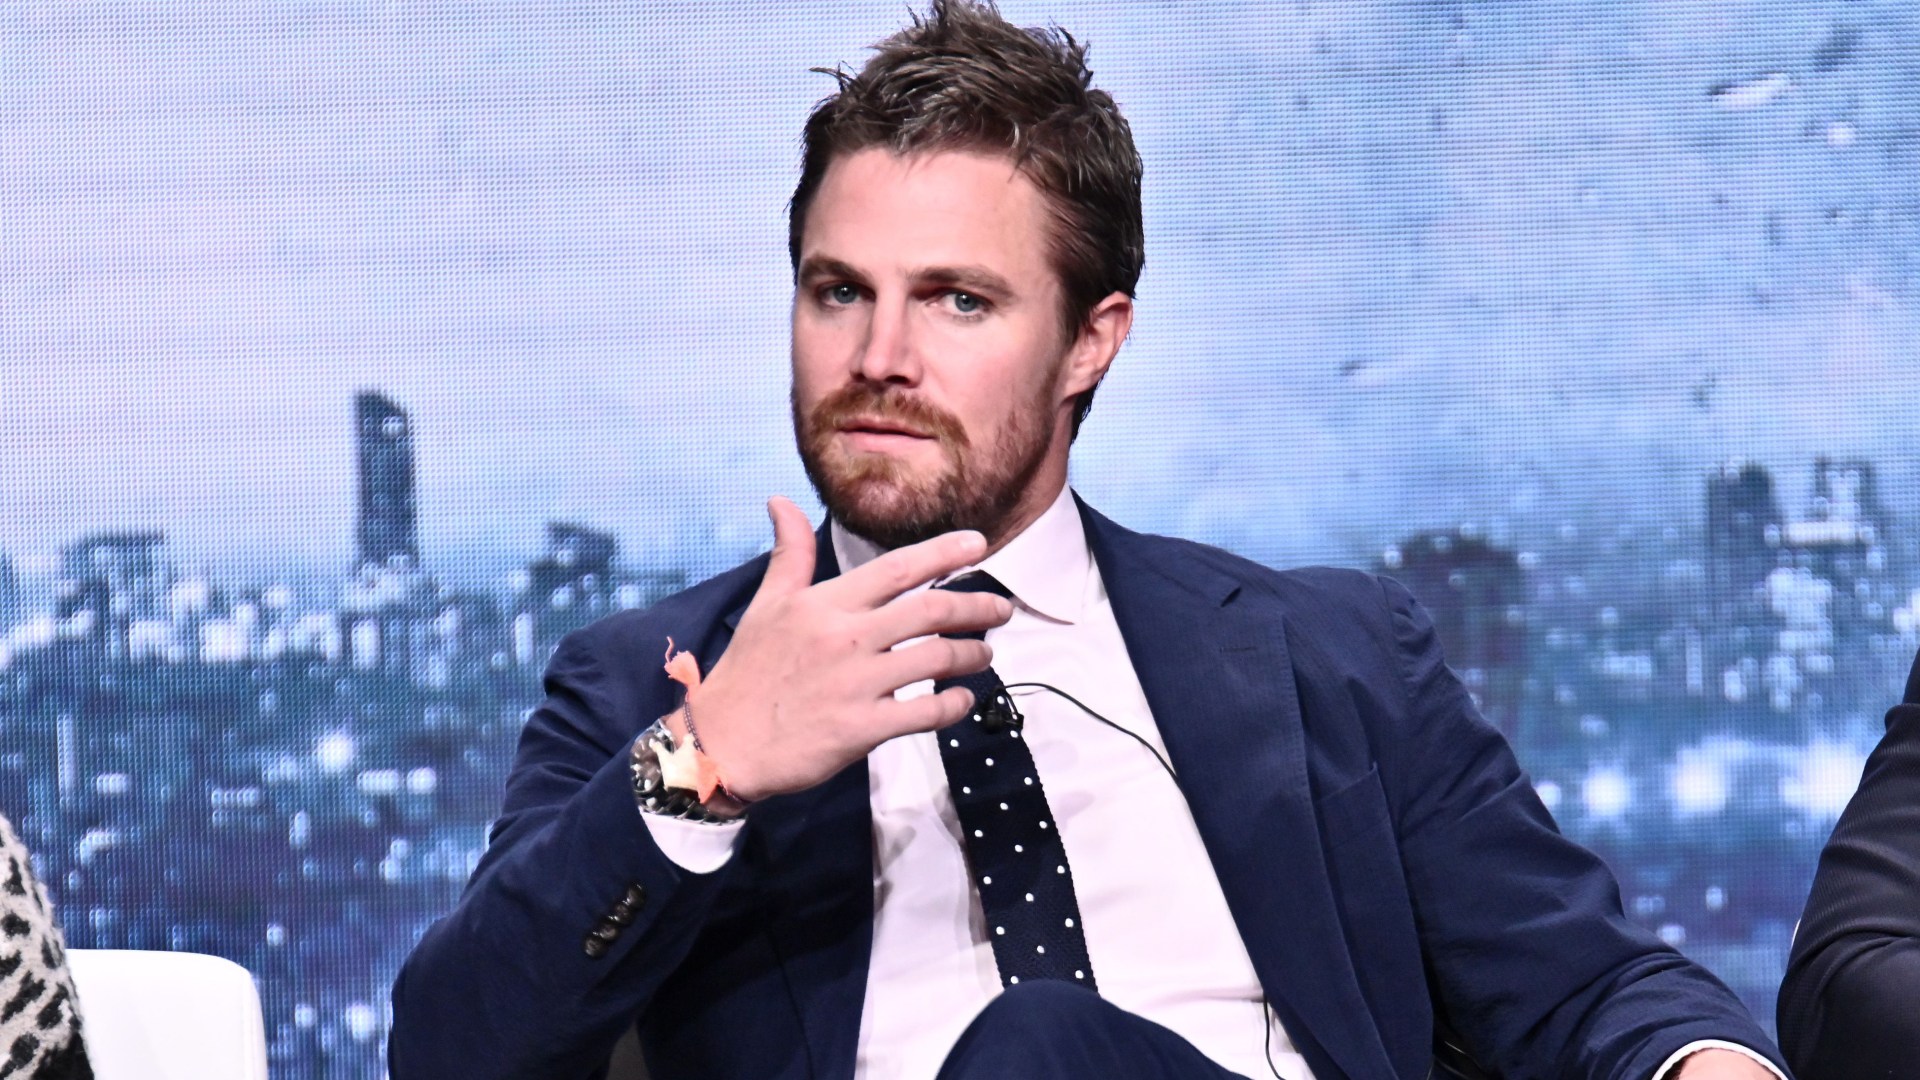 Stephen Amell Reveals Why 'Arrow' Season 8 Is the Series' End